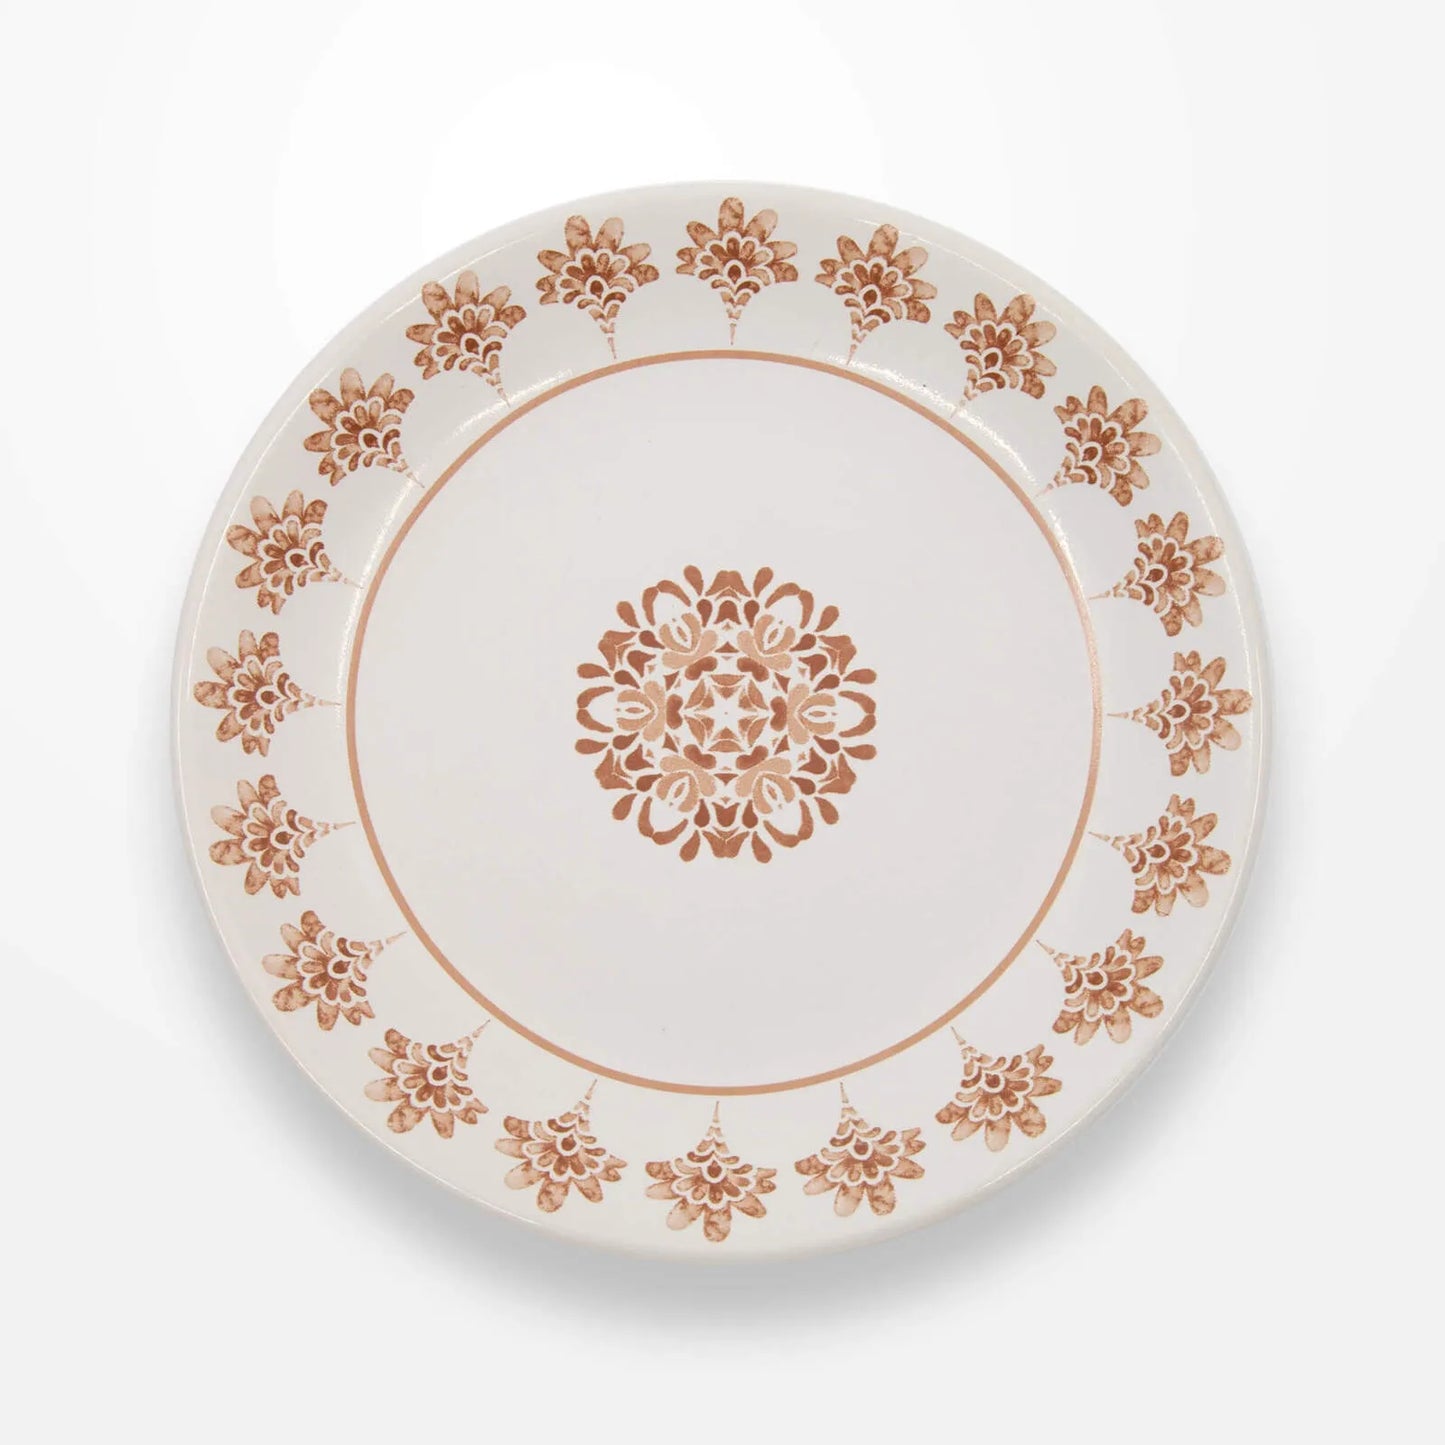 Side Plate - Moroccan Tile